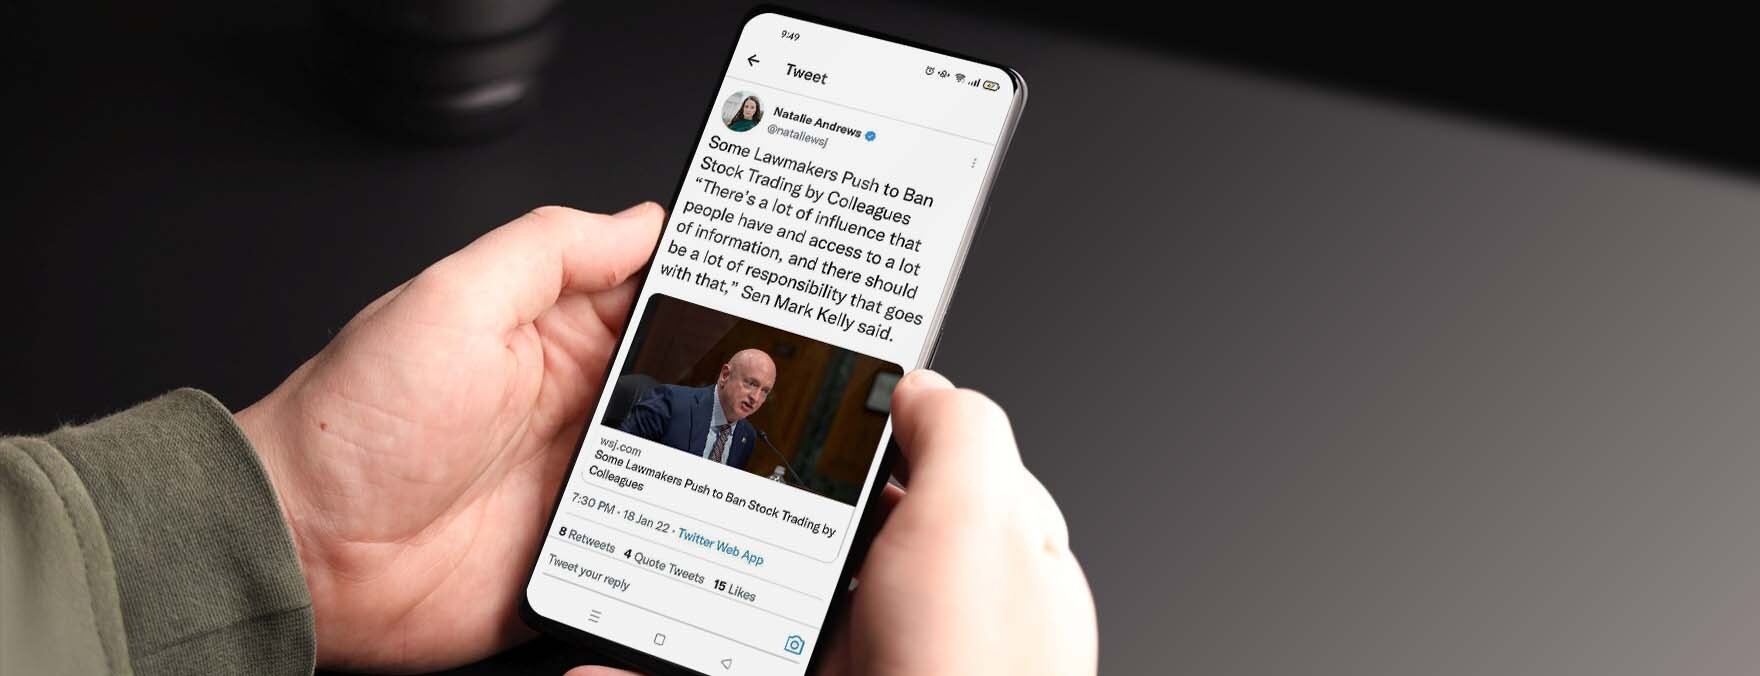 A man is holding a mobile phone in which the tweet of Natelle Andrews is displayed